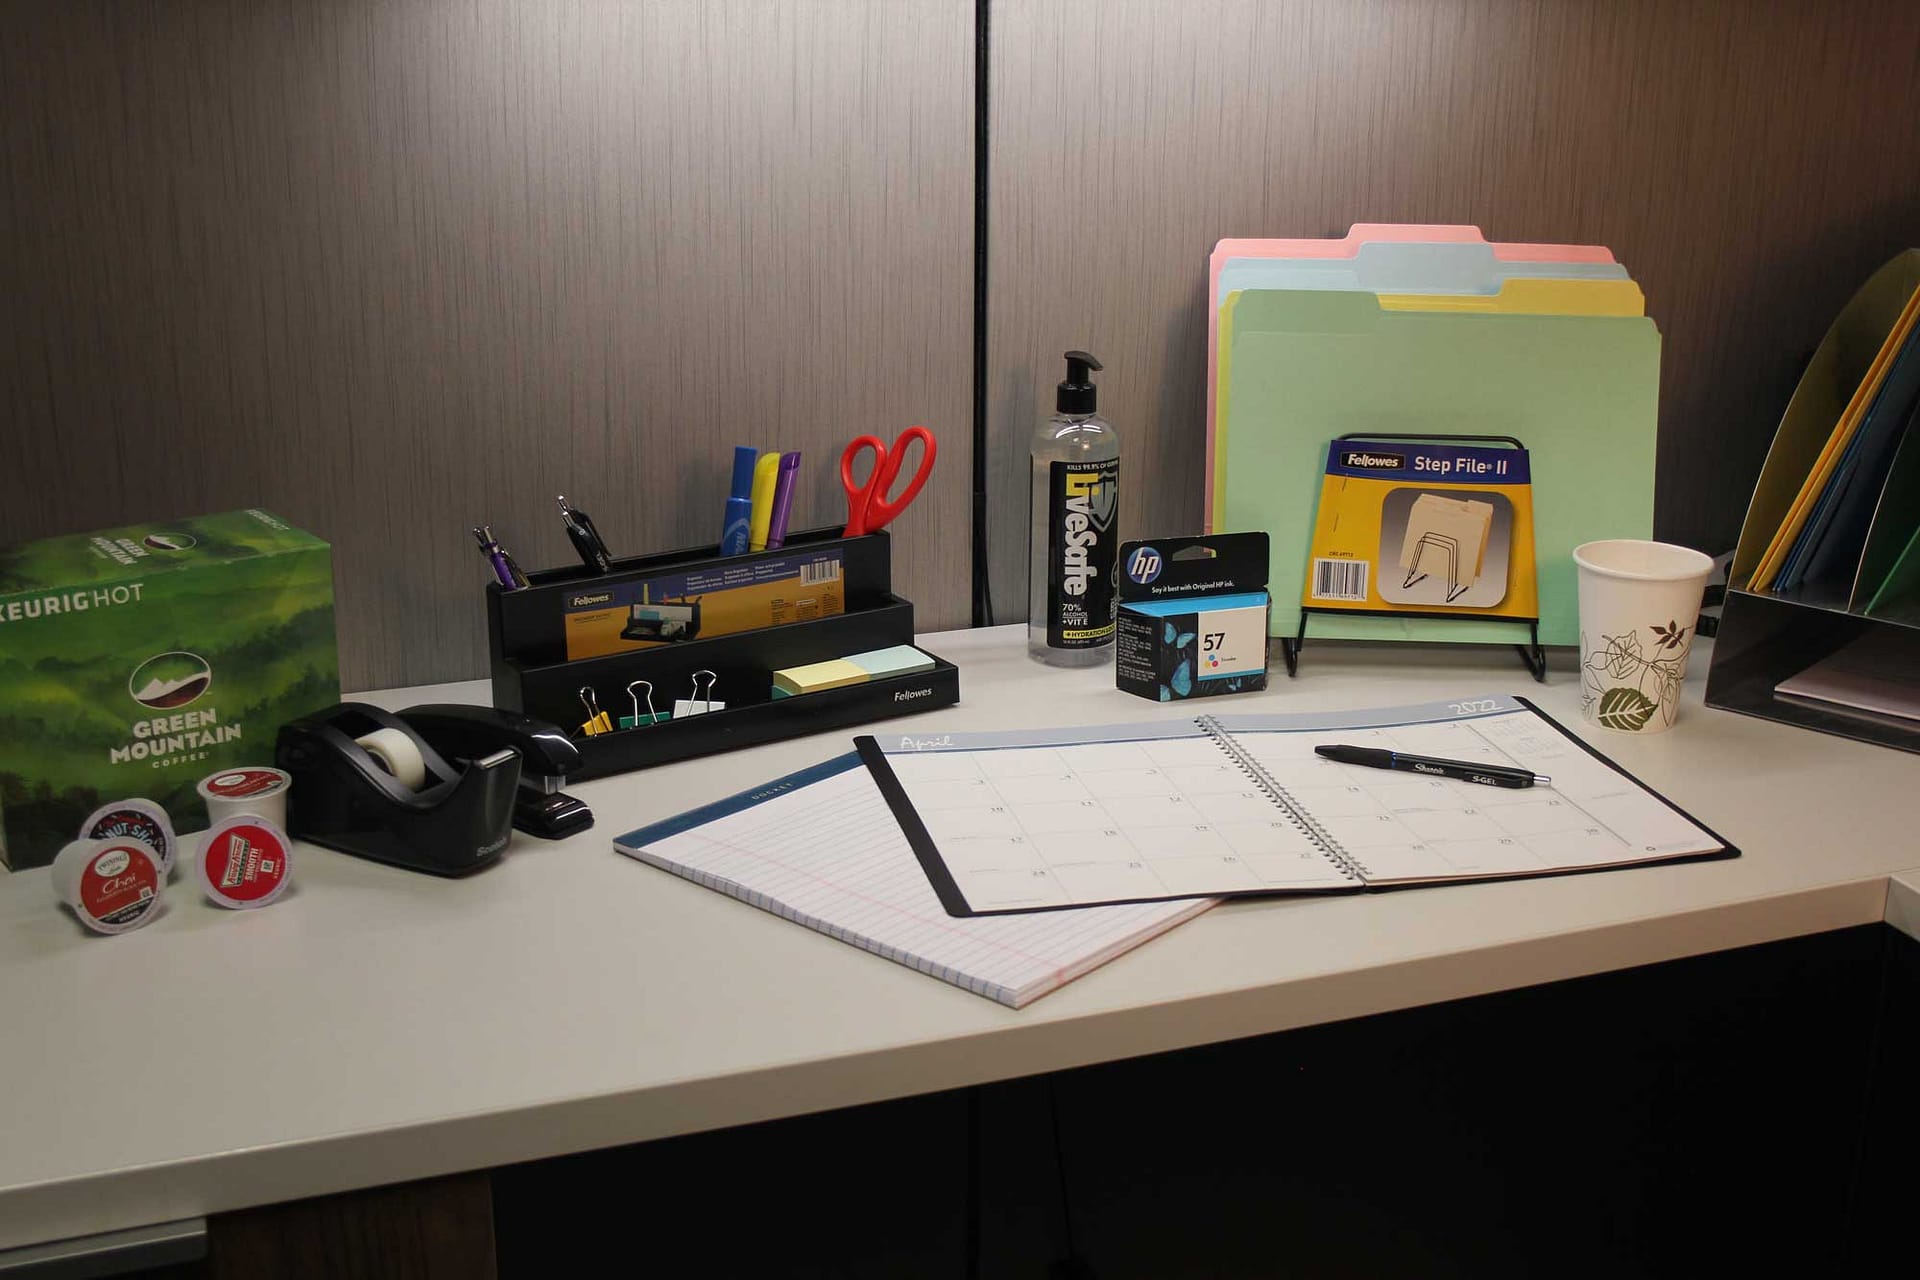 37 Cool Office Supplies To Impress Your Coworkers in 2022 – SPY